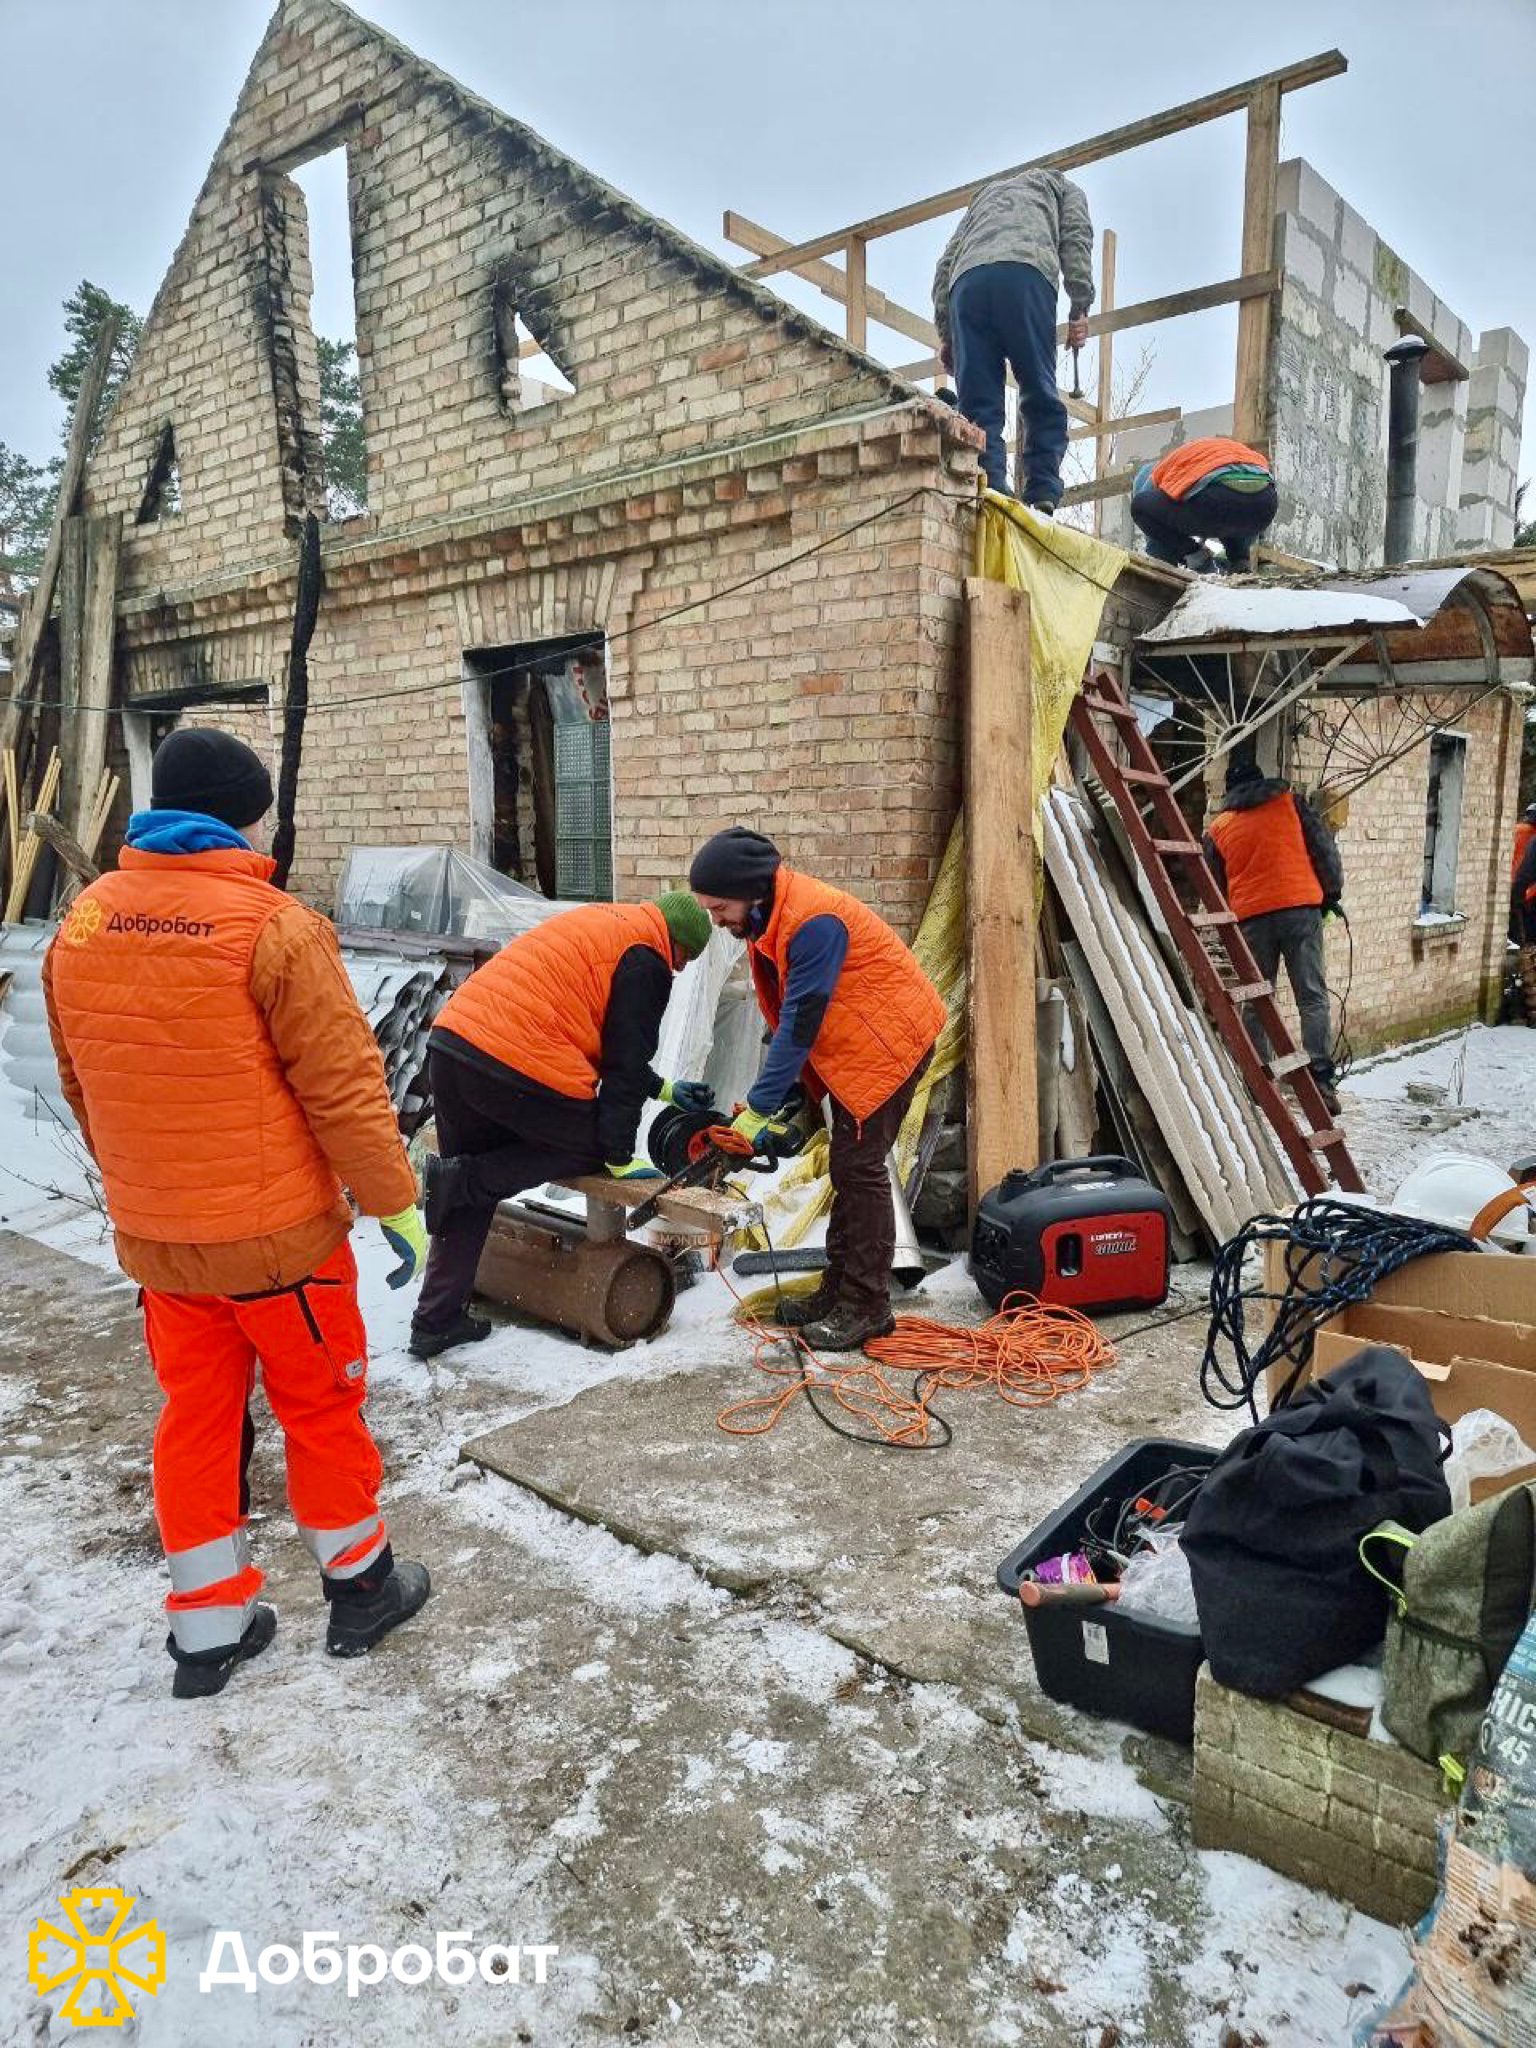 The volunteers repaired residential buildings, a university, a community cultural center, an art school and removed rubble: about the week of reconstruction by Dobrobat